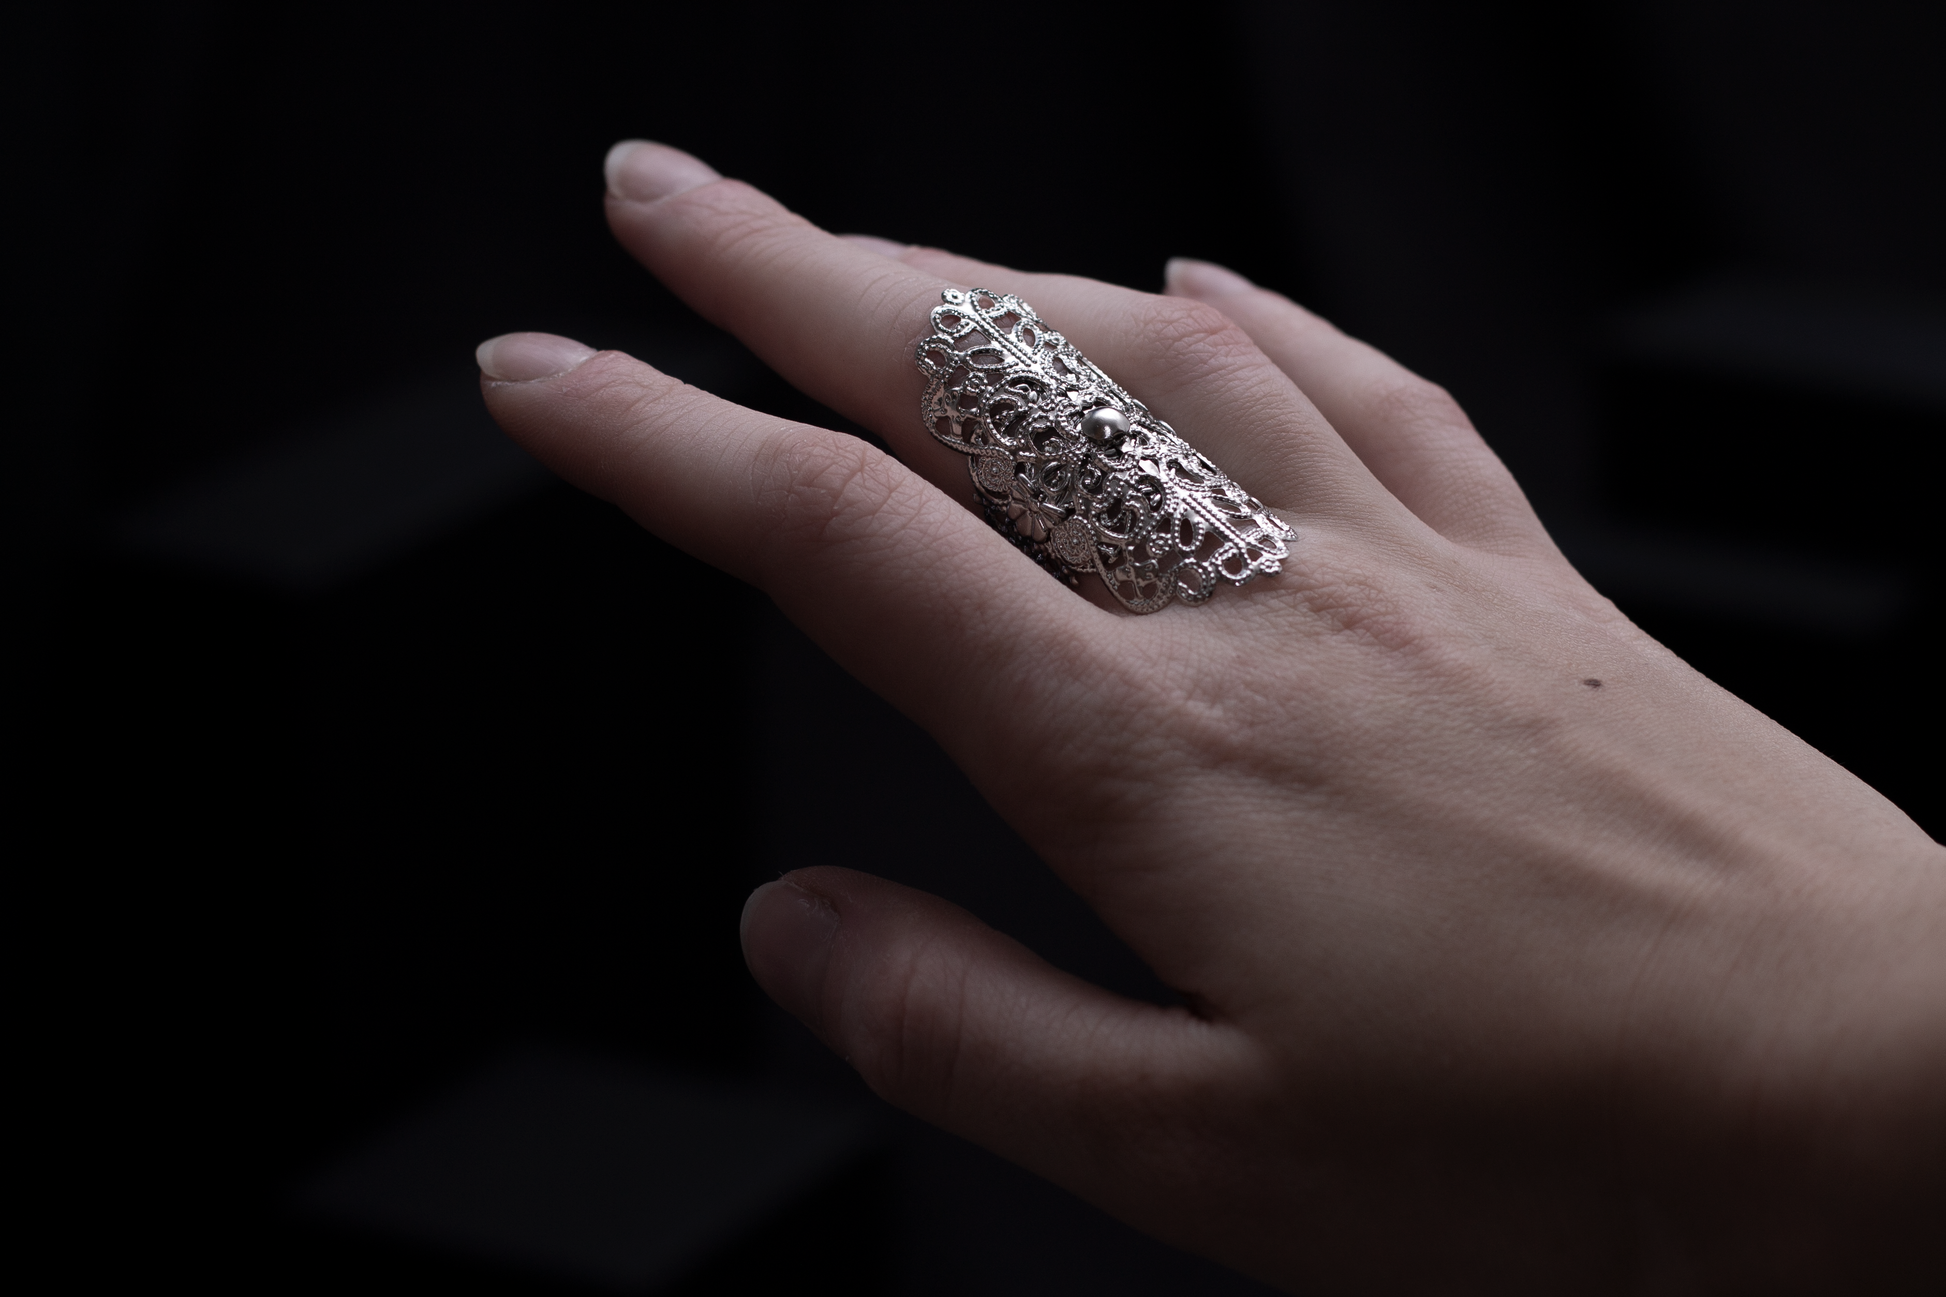 A hand models an oval gothic ring by Myril Jewels, showcasing delicate filigree details perfect for gothic-chic fashion lovers. This bold, handcrafted piece makes a statement as everyday wear, festival jewelry, or as a distinctive goth girlfriend gift, embodying a dark avant-garde aesthetic